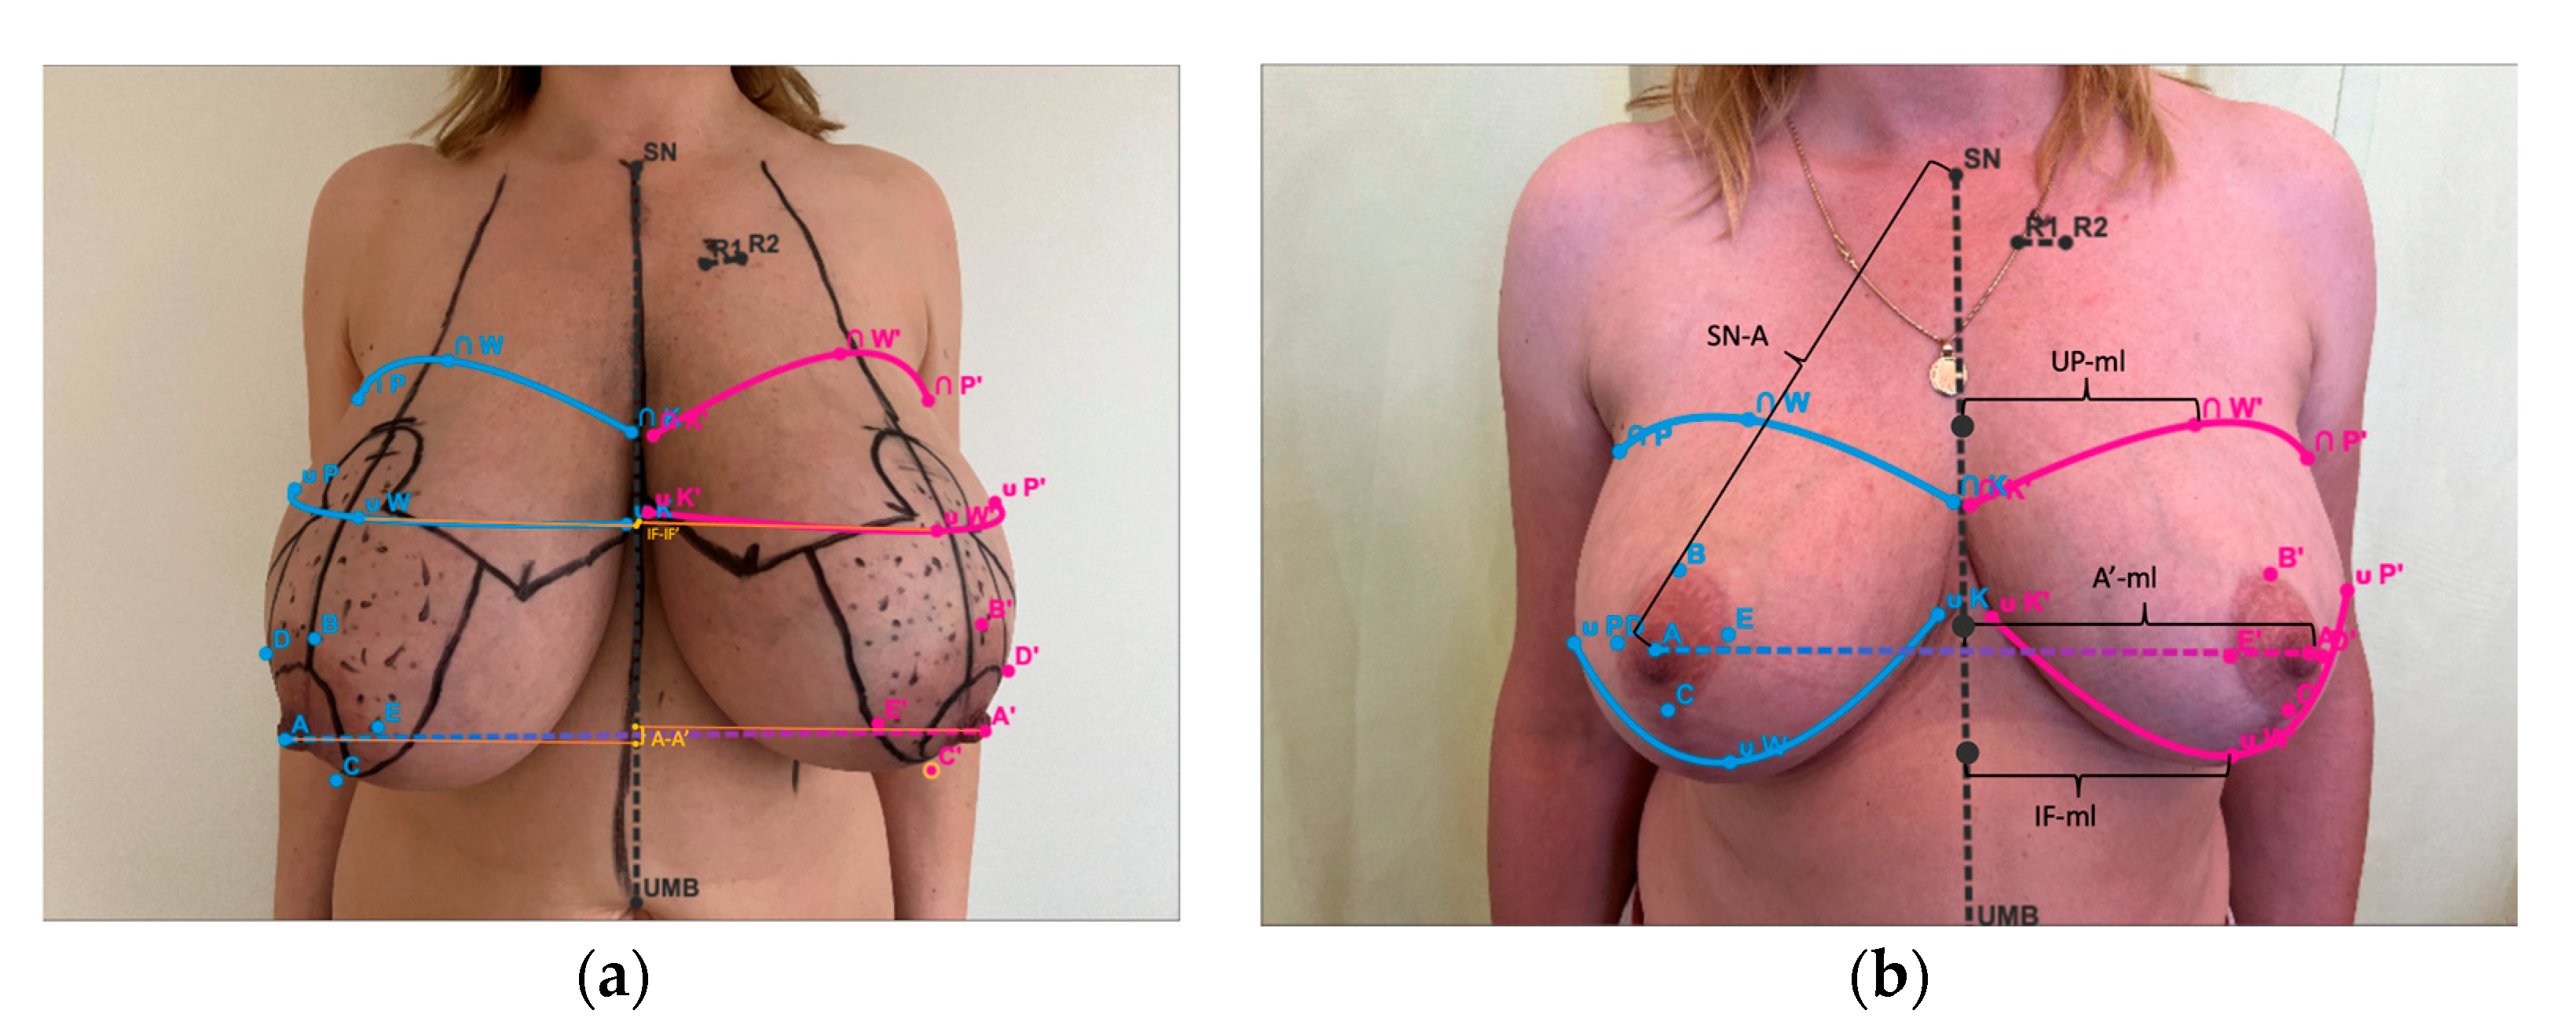 Breast Reduction Mammaplasty 1 year results Cup size DDD >> small C  #breastreduction #mammaplasty #plasticsurgery